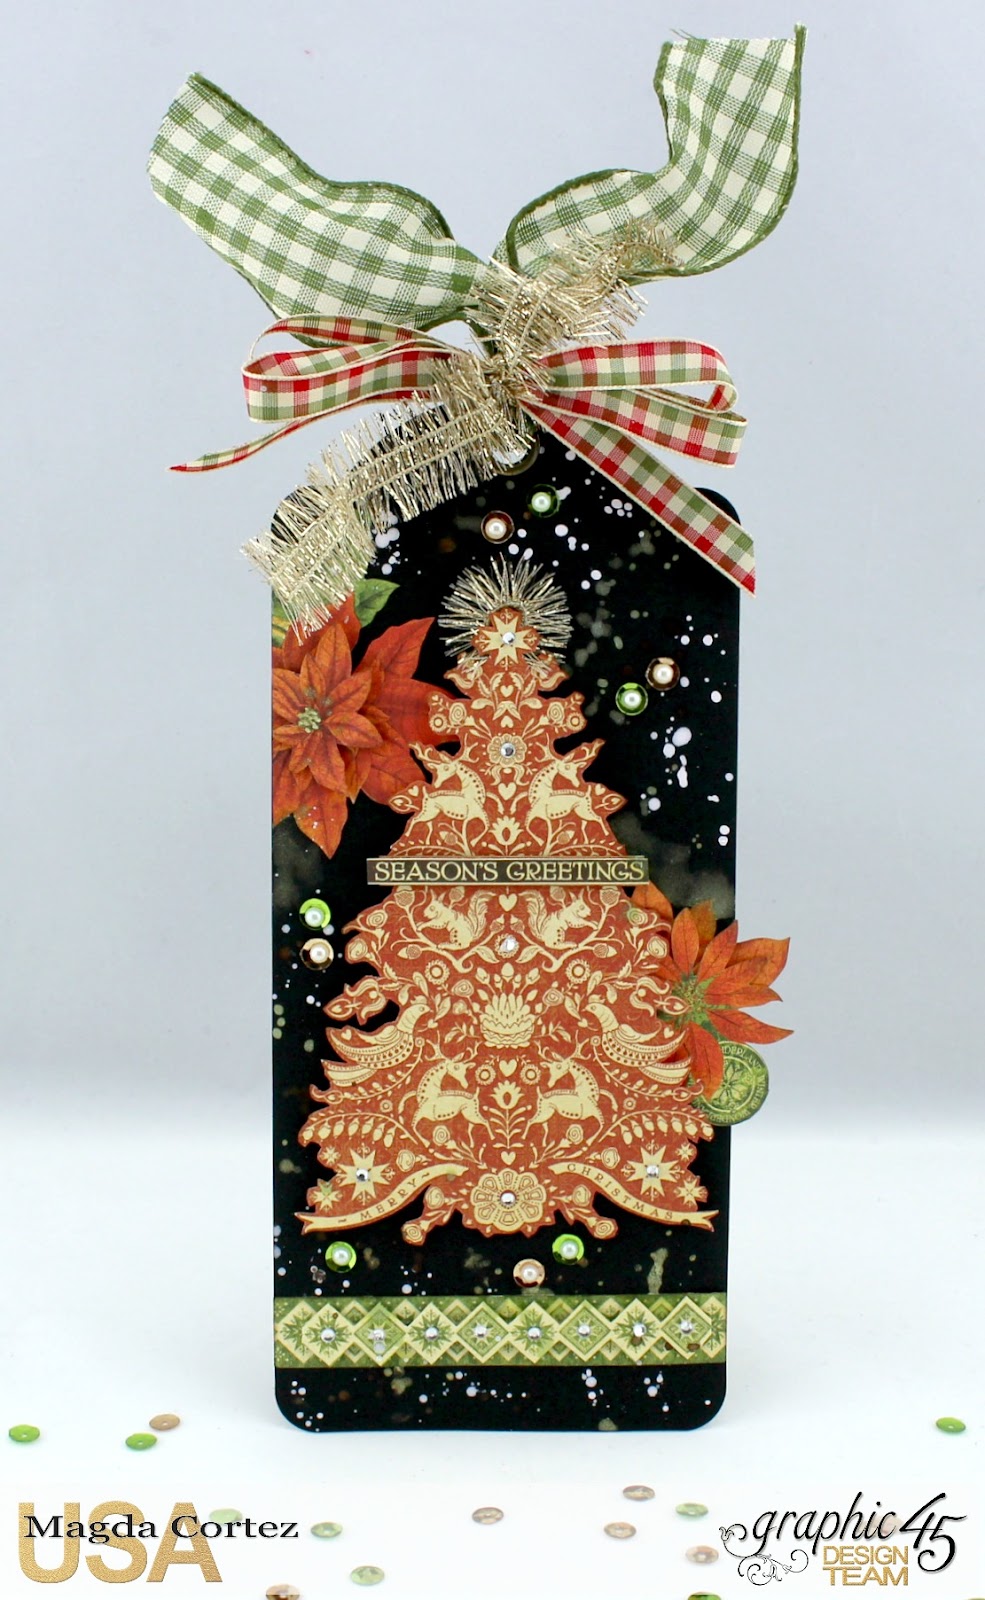 Joy Set of Tags, Winter Wonderland, By Magda Cortez, Product by Graphic 45, Photo 05 of 09.jpg